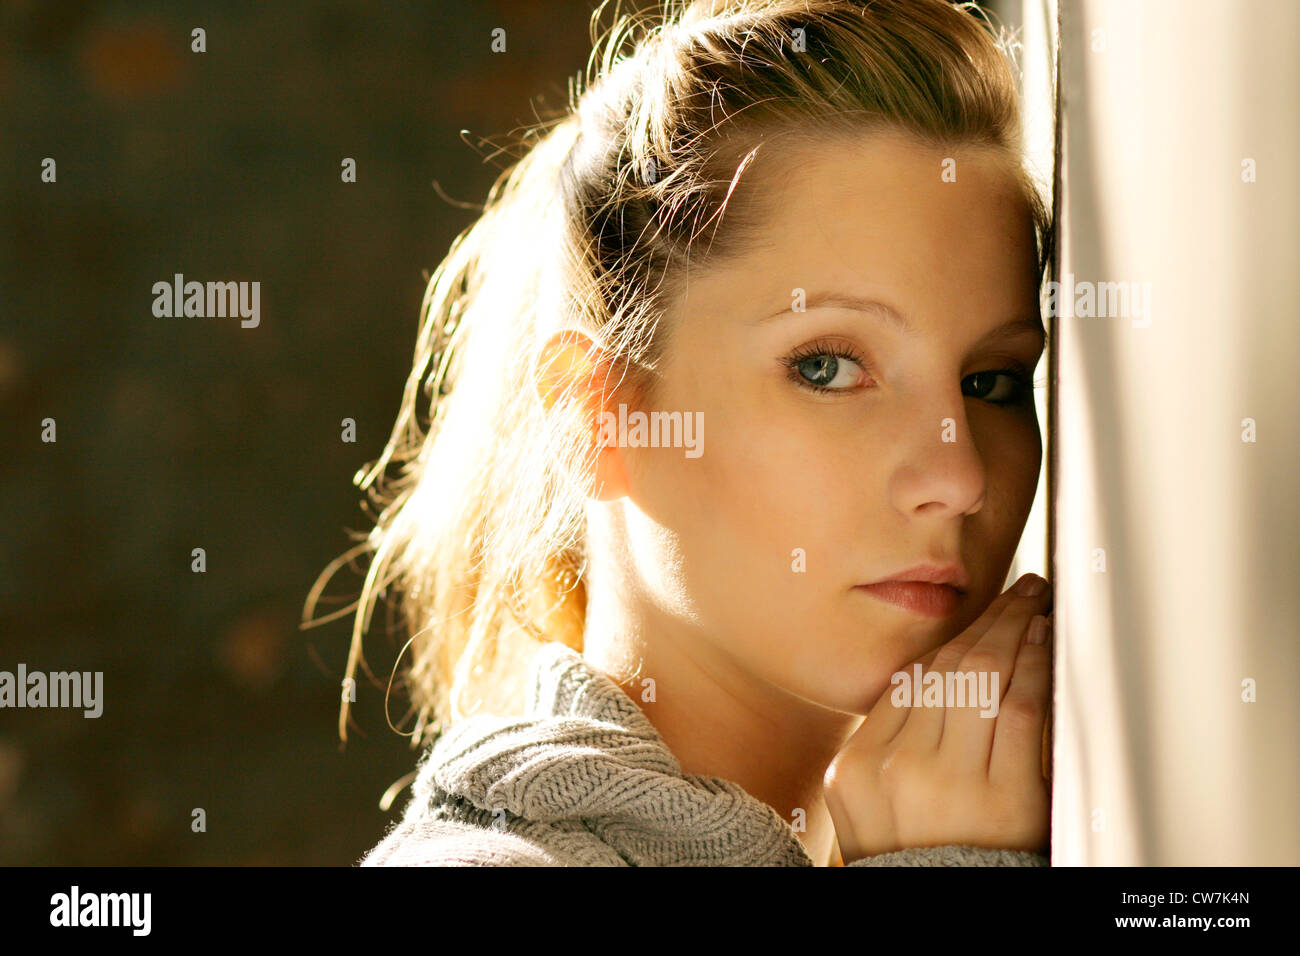 young blond woman leaning against a wall Stock Photo